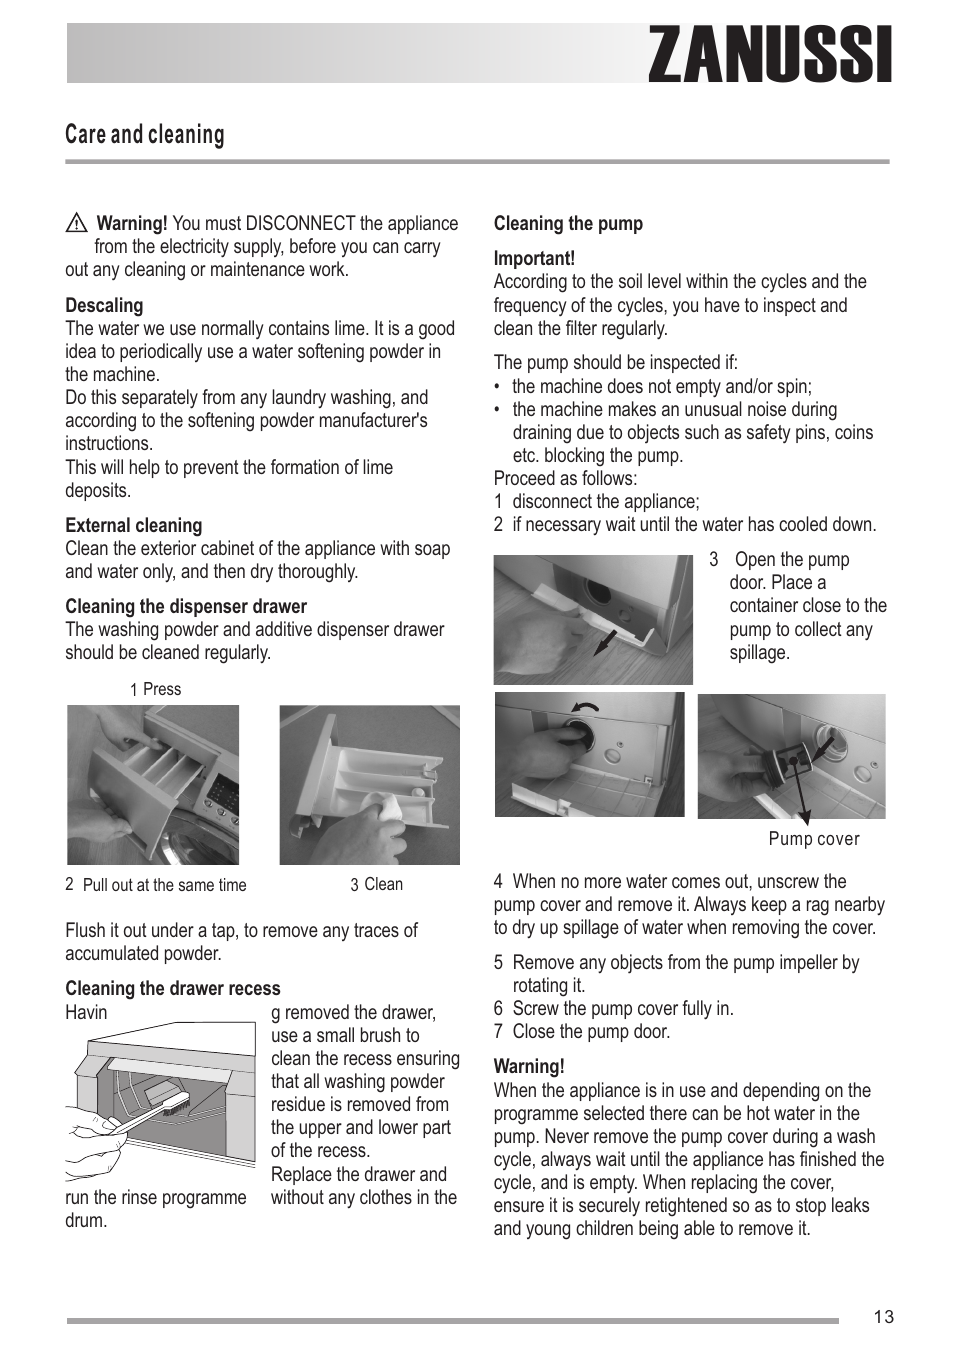 Zanussi, Care and cleaning | Zanussi ZWG1140M User Manual | Page 13 / 20